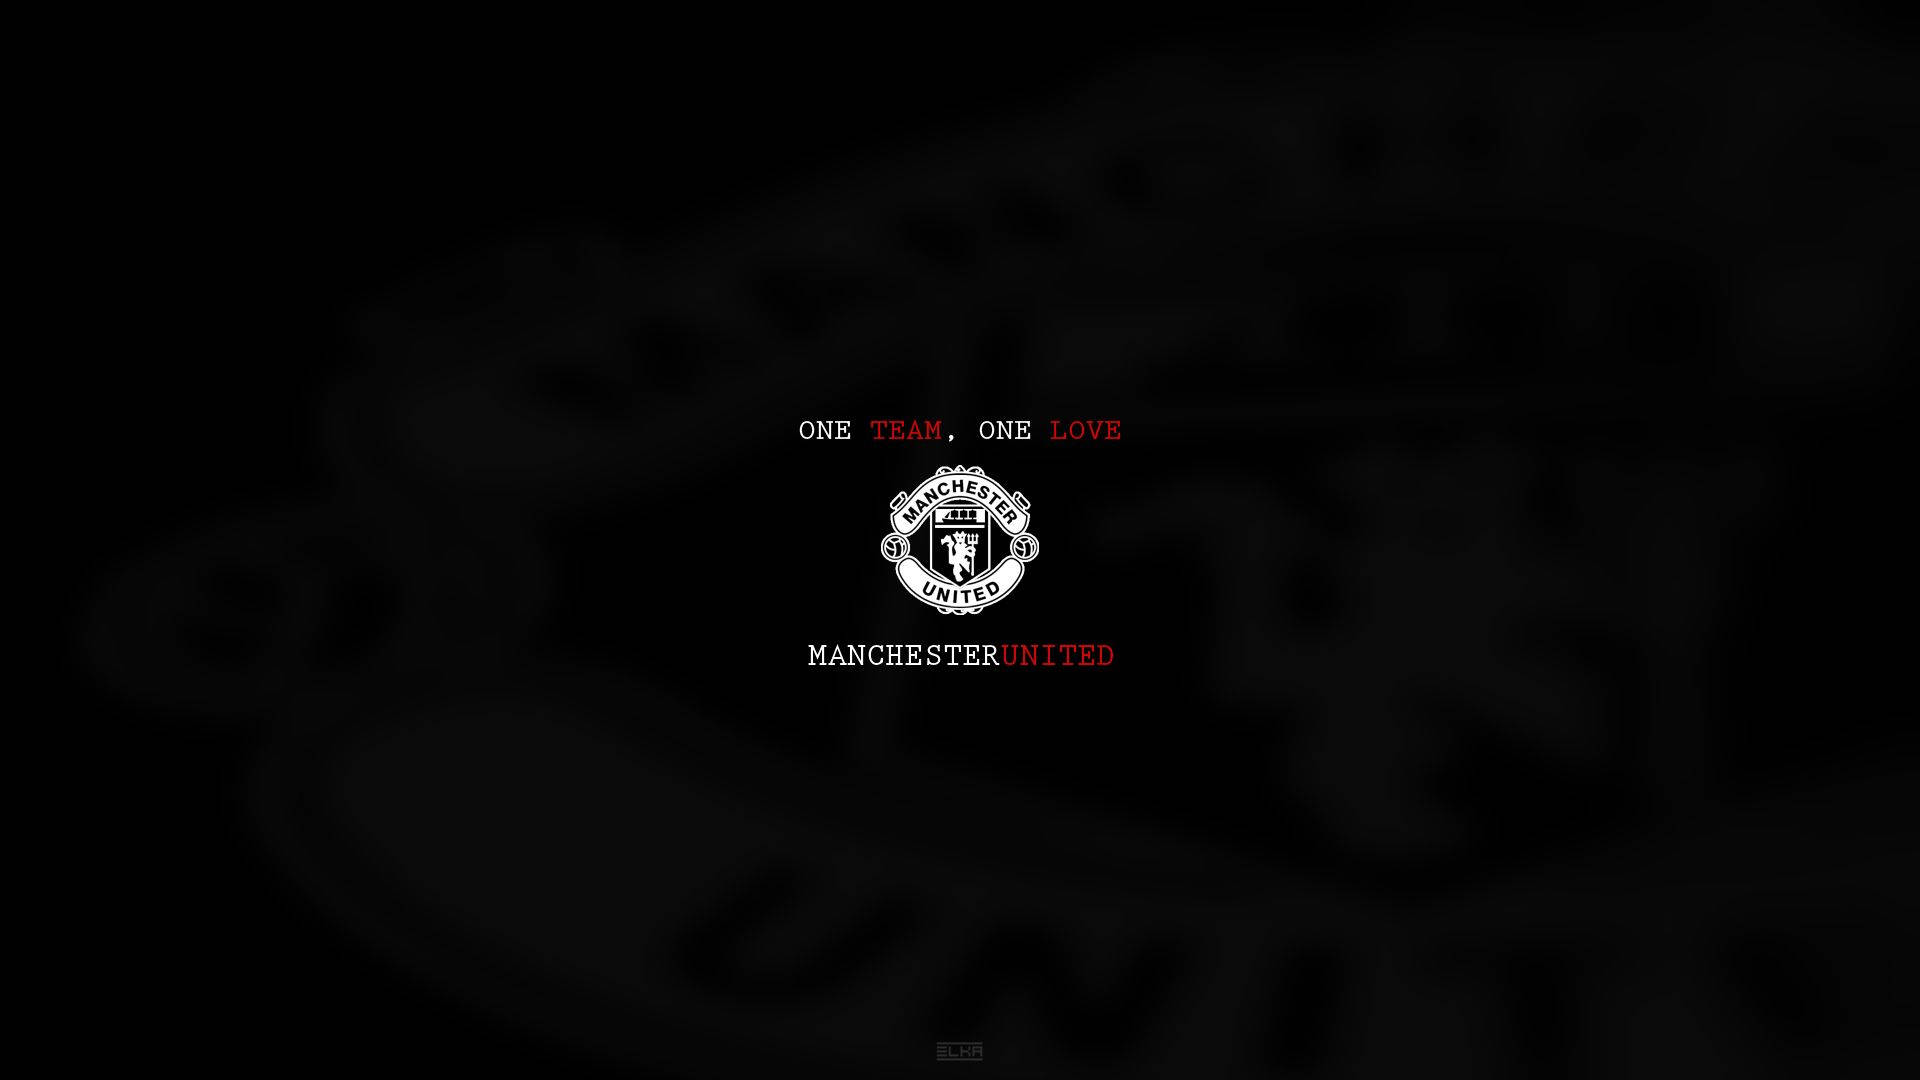 One Love Manchester United Wallpaper